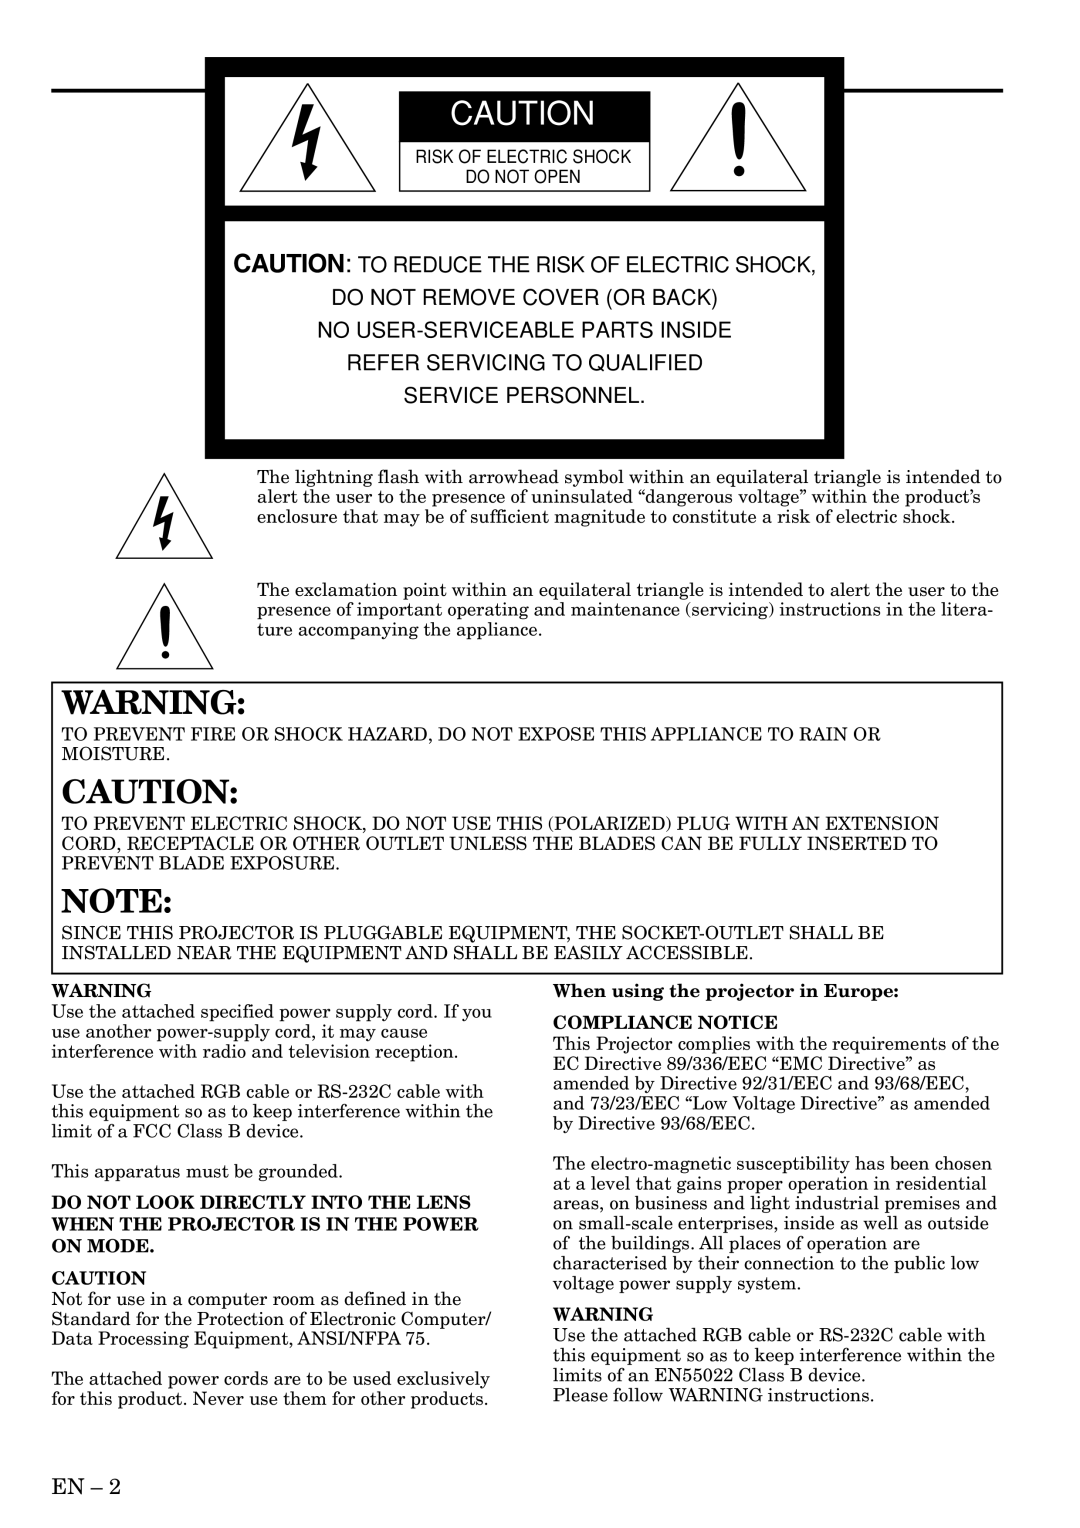 Mitsubishi Electronics XL6U Caution To Reduce The Risk Of Electric Shock, Refer Servicing To Qualified Service Personnel 